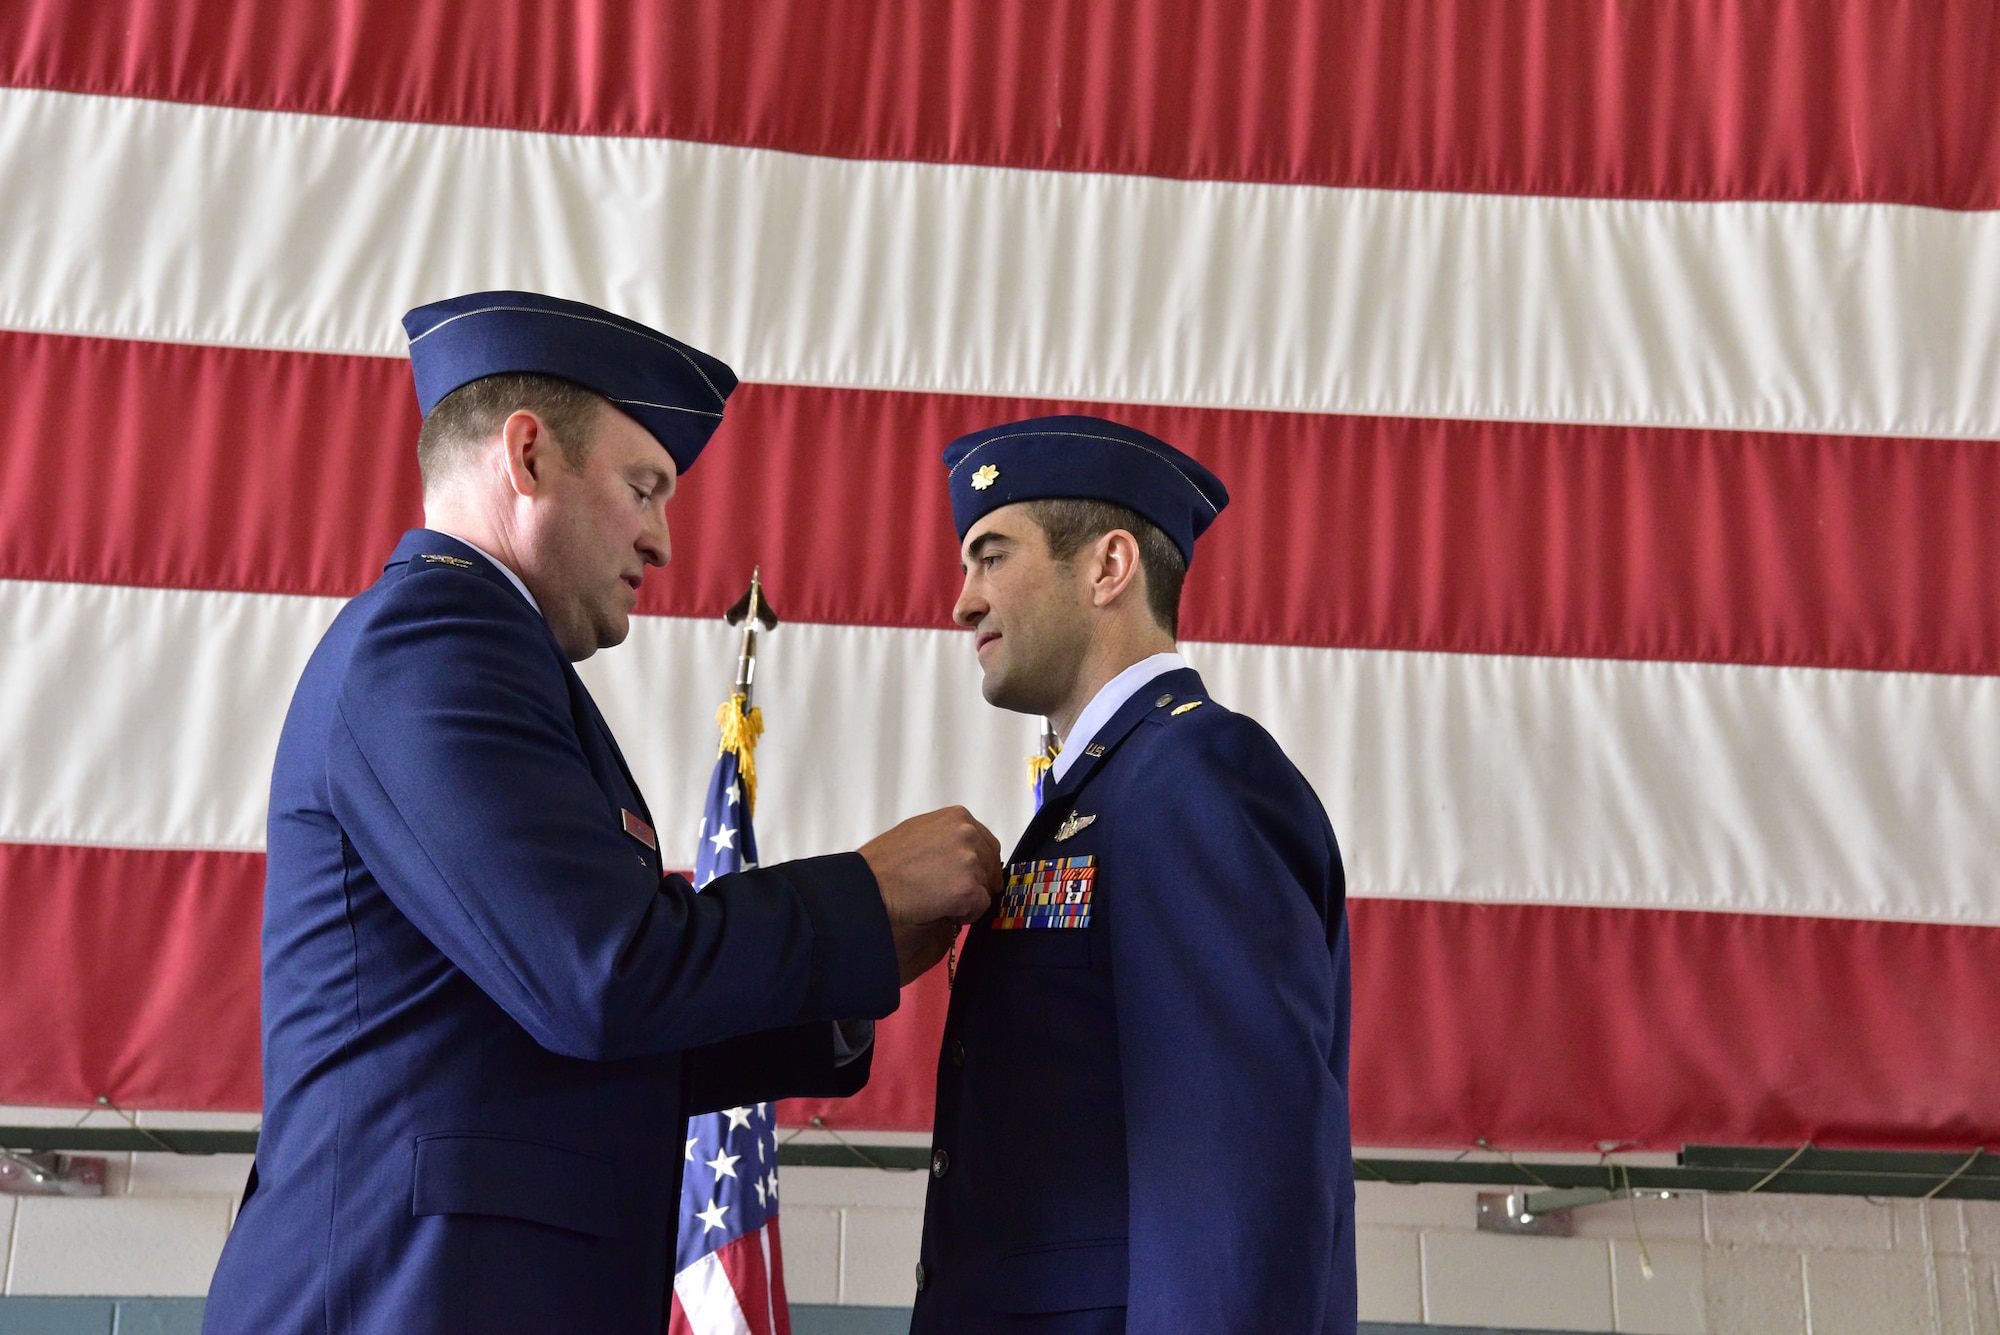 Col. Bradley Downs (left), vice commander of the 492nd Special Operations Wing, pins the Distinguished Flying Cross on Maj. Michael Tolzien, 58th Special Operations Wing during a ceremony July 6 at Kirtland Air Force Base.